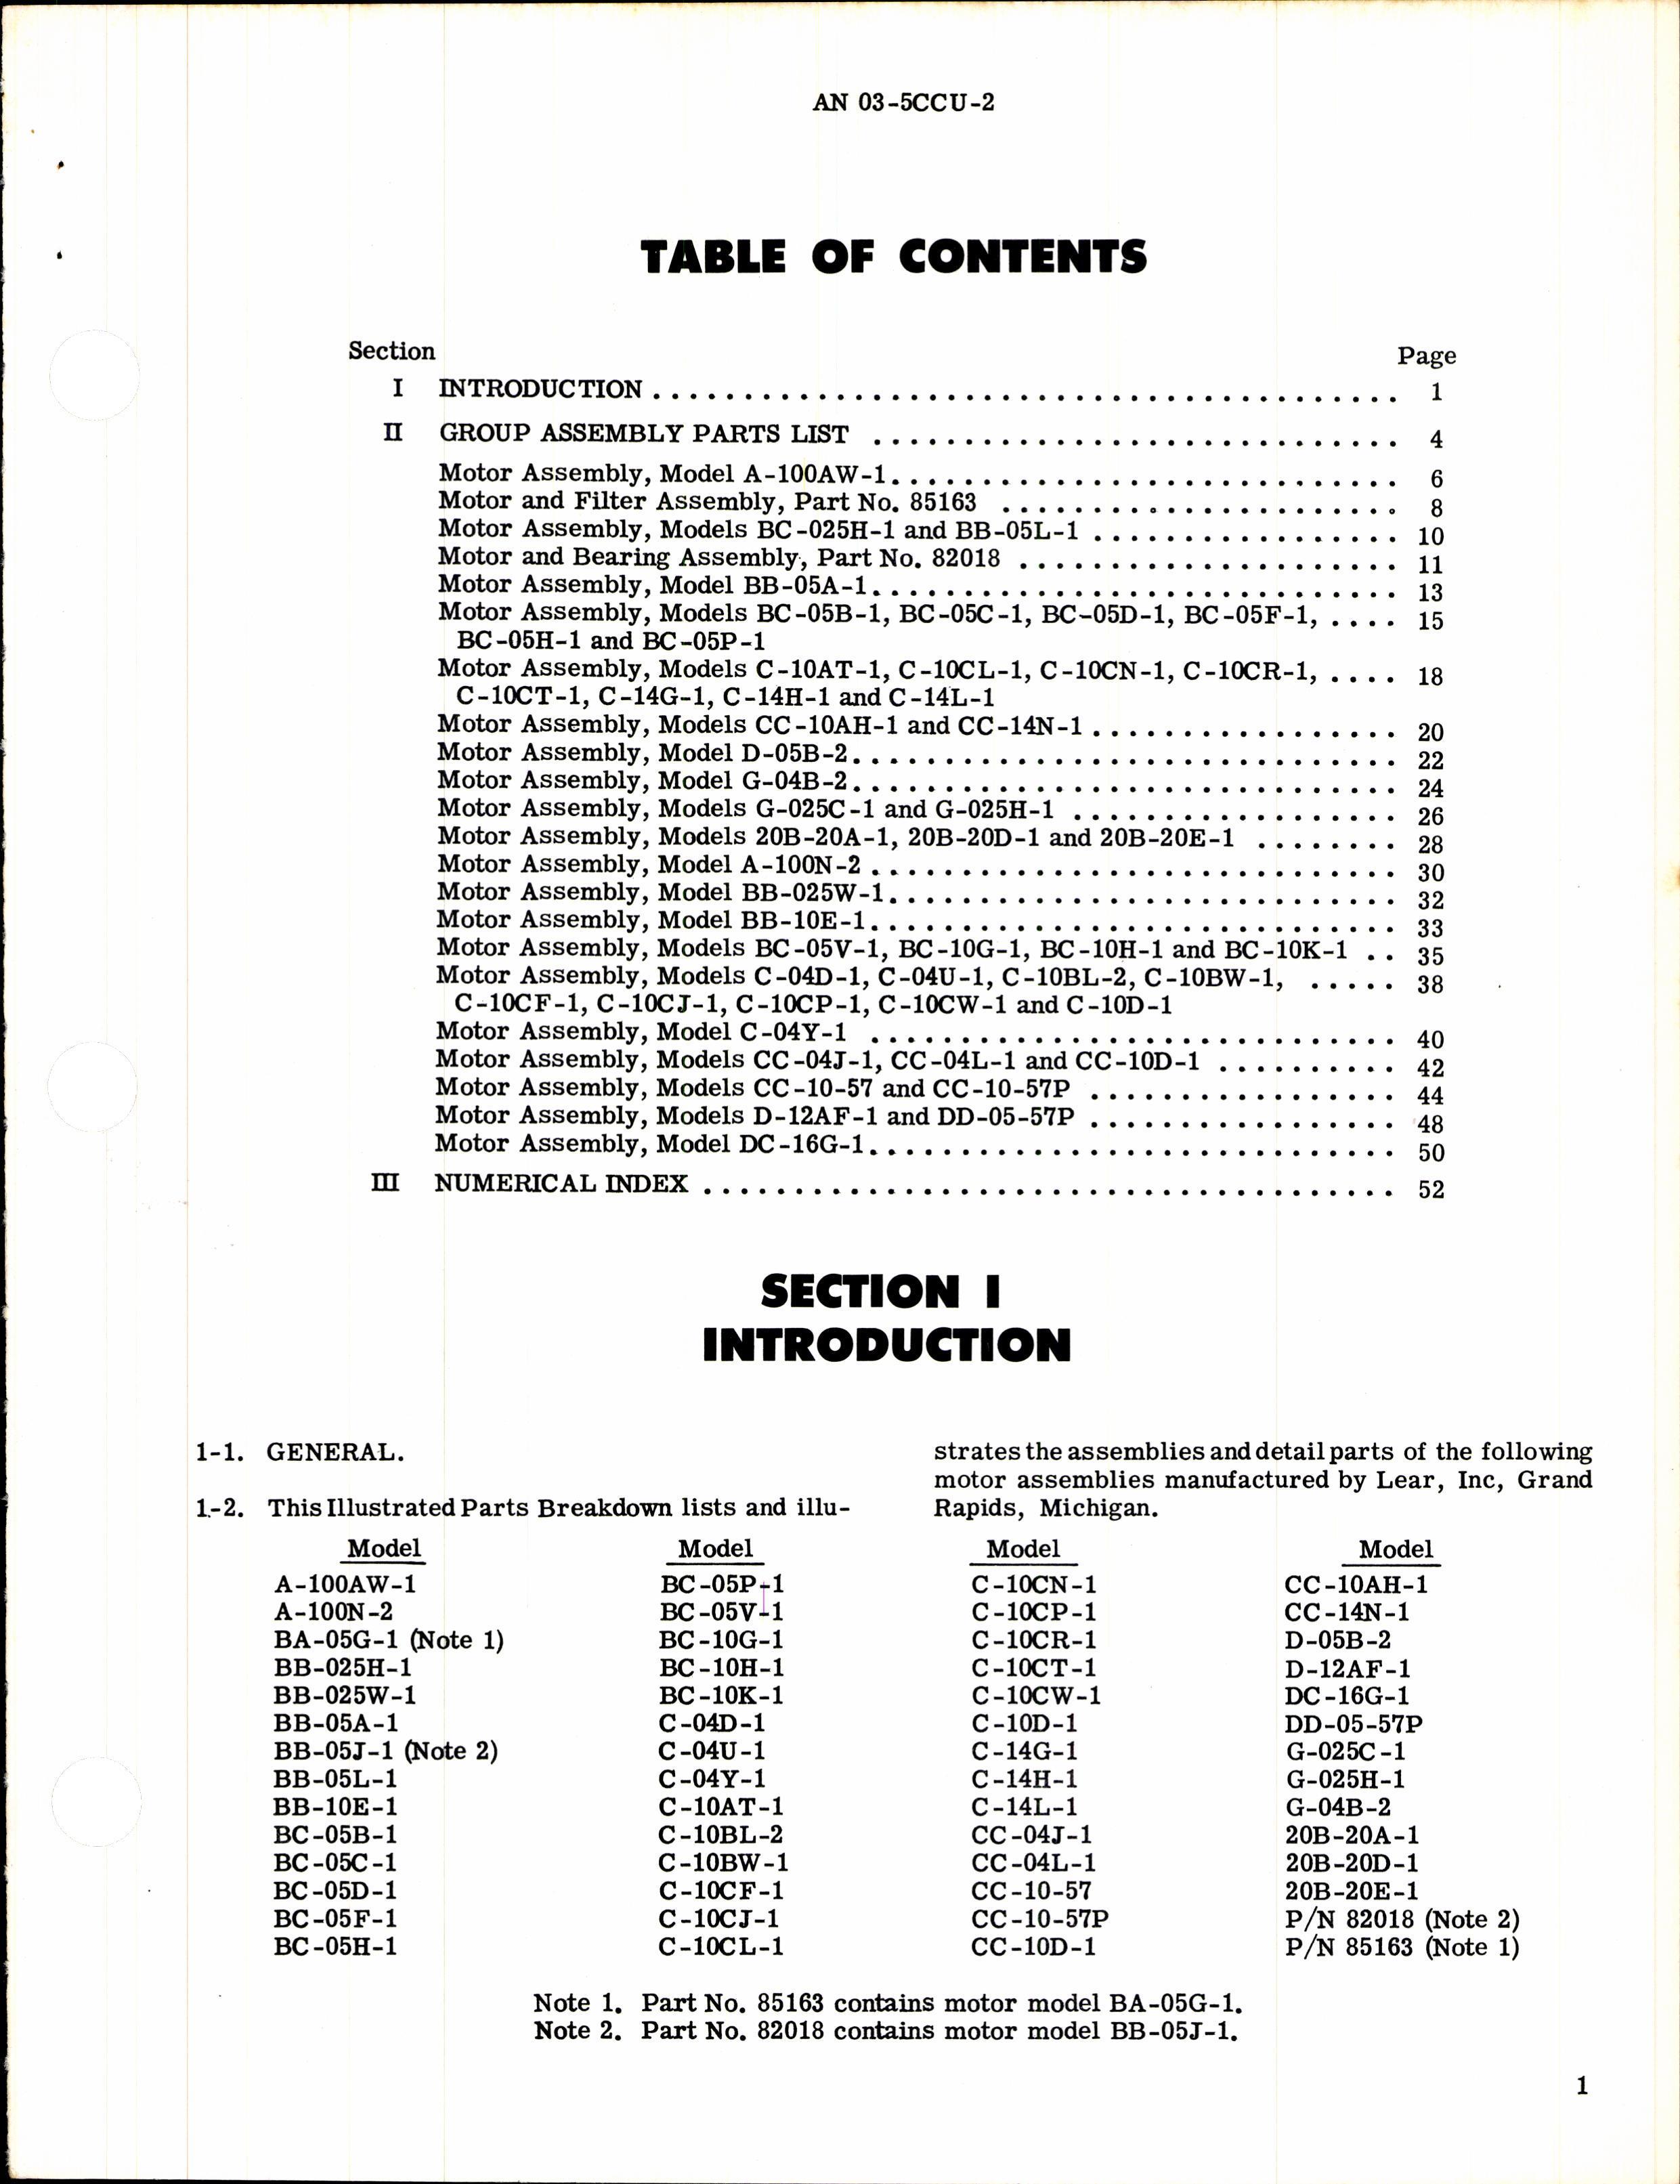 Sample page 3 from AirCorps Library document: Illustrated Parts Catalog for Lear Fractional Horsepower Motors